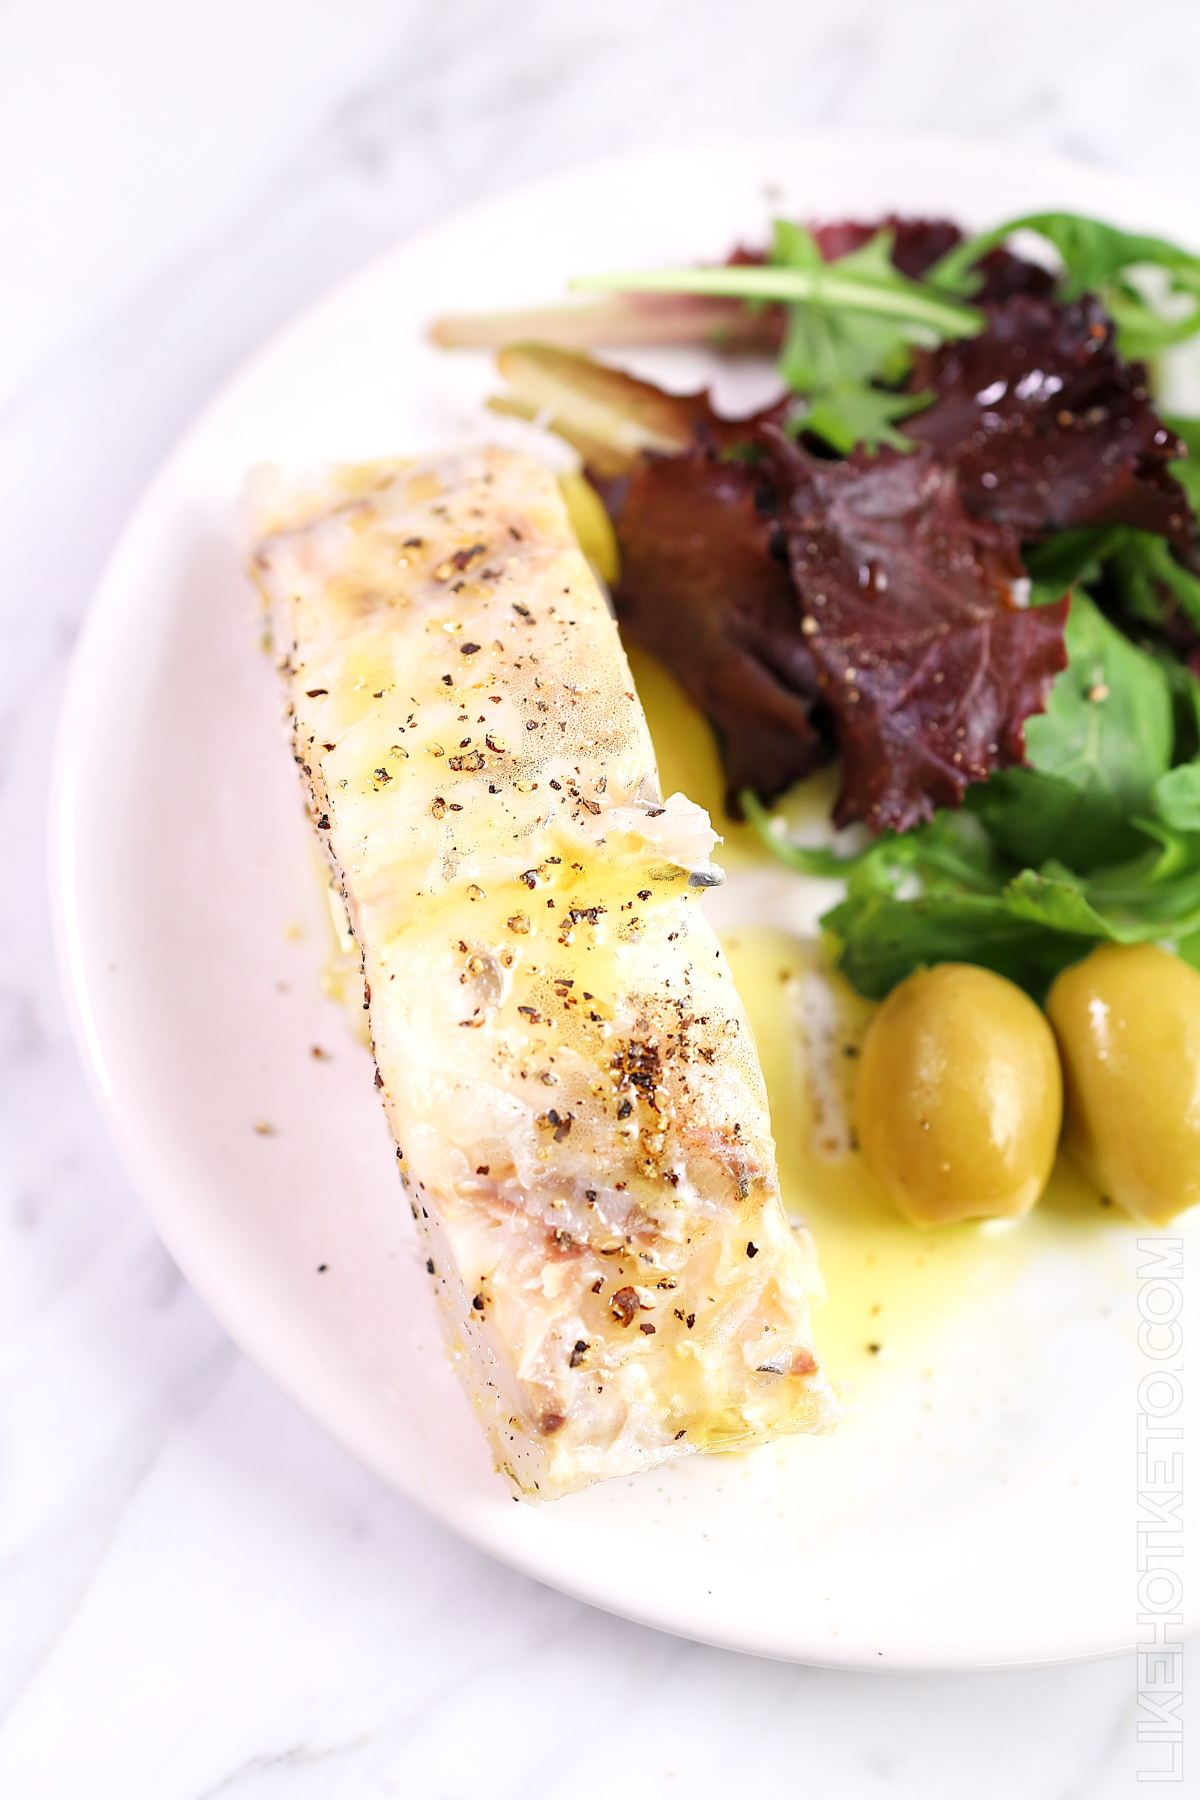 Cooked cod fillet topped with olive oil and cracked peppercorns.